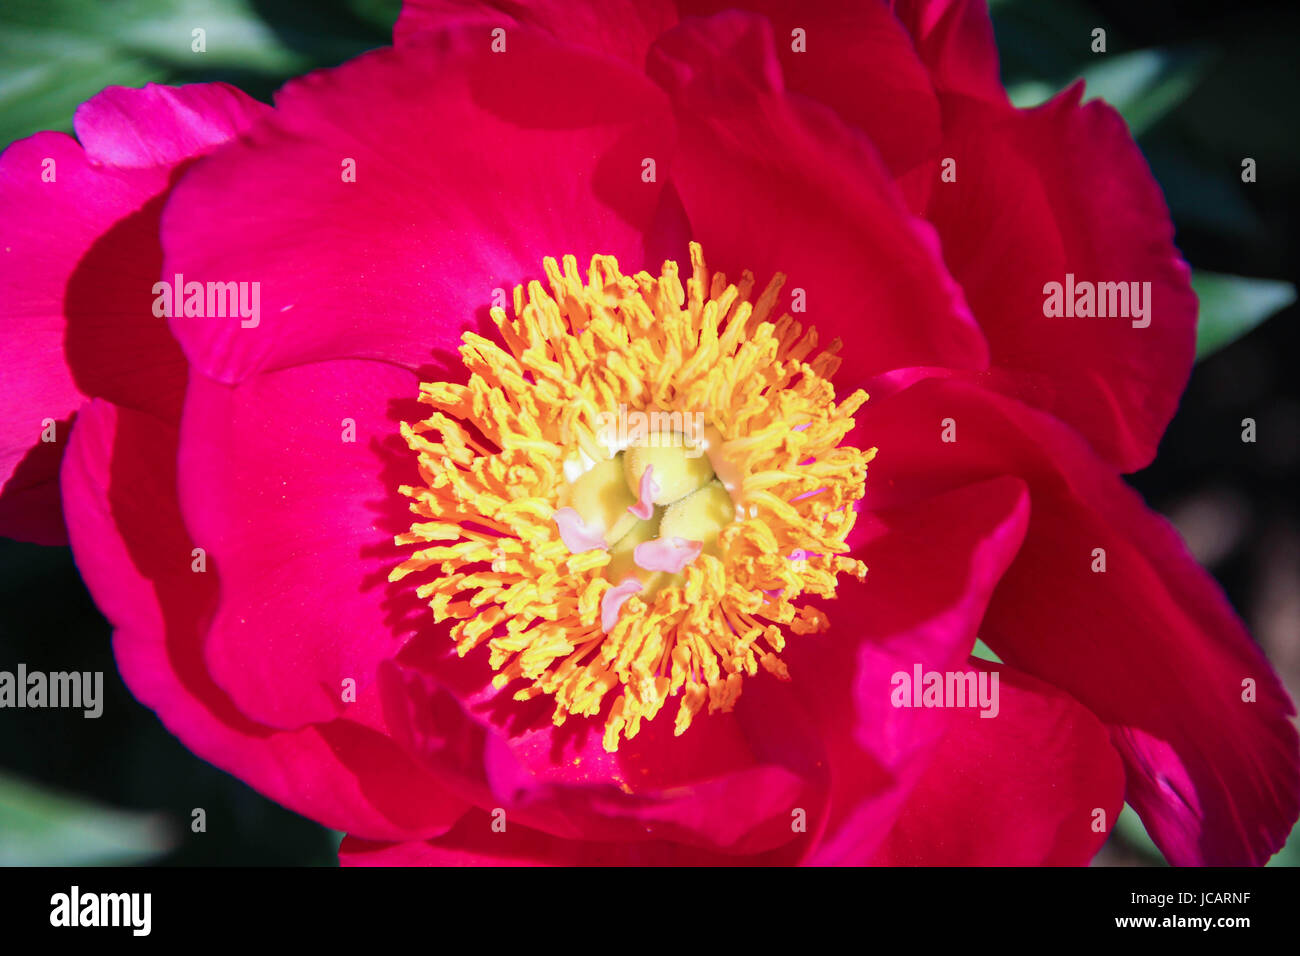 A Pink  Big Peony Flower Head with Pistil and Staminas Close up Stock Photo